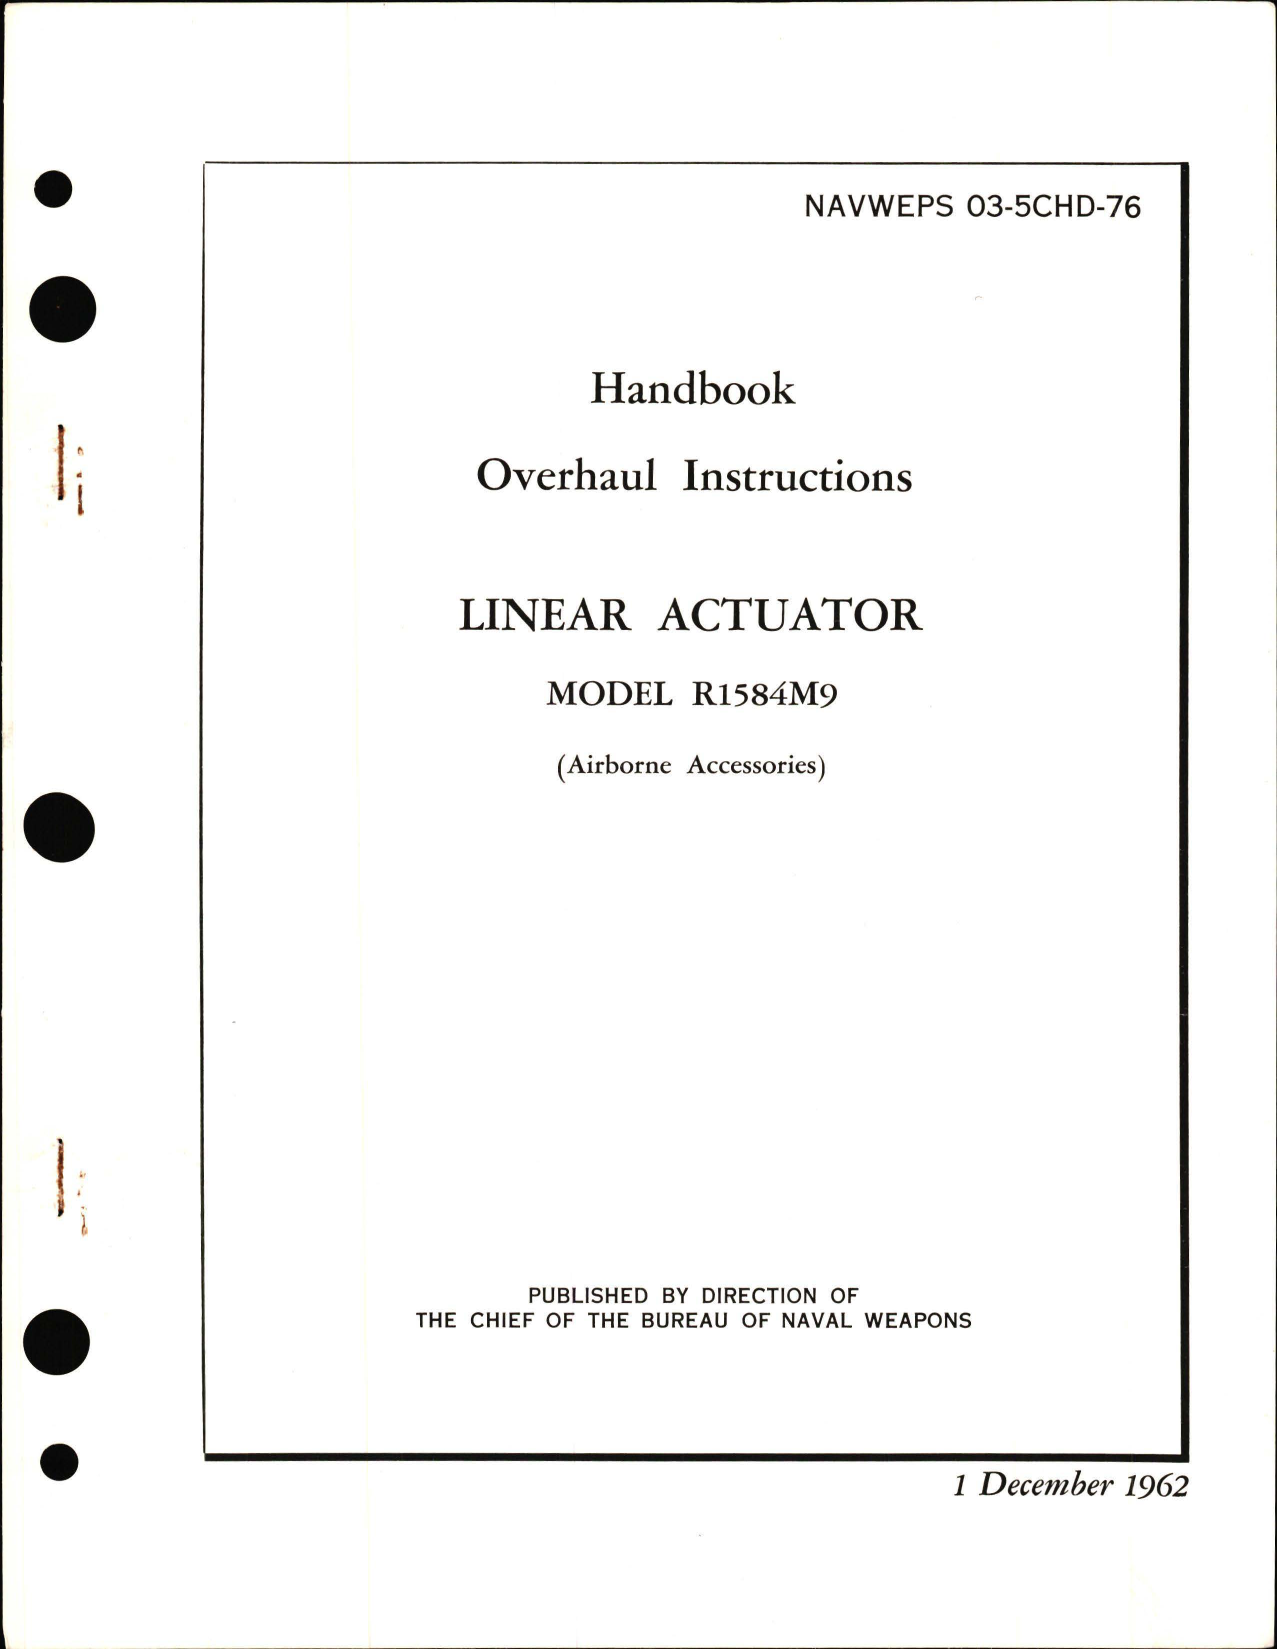 Sample page 1 from AirCorps Library document: Overhaul Instructions for Linear Actuator Model R1584M9